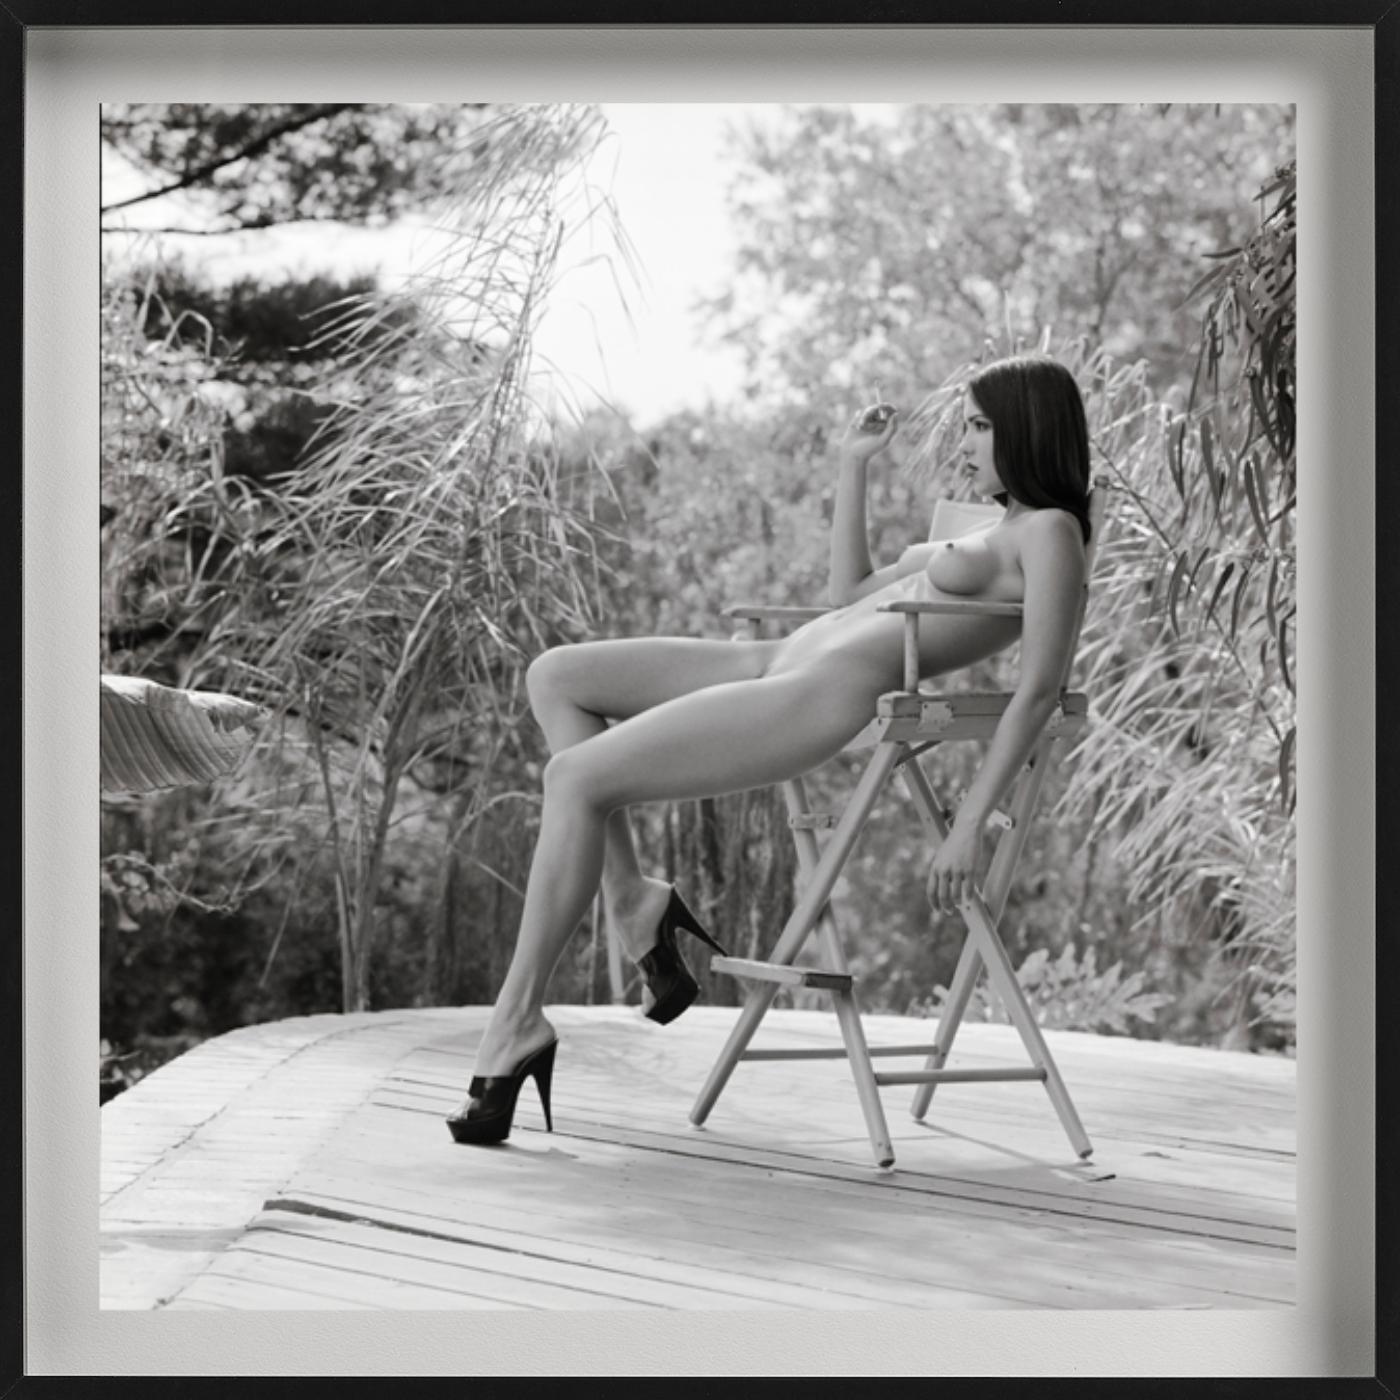 'Faith will allow you to grow '- nude in Garden, fine art photography, 1996 - Photograph by Guido Argentini